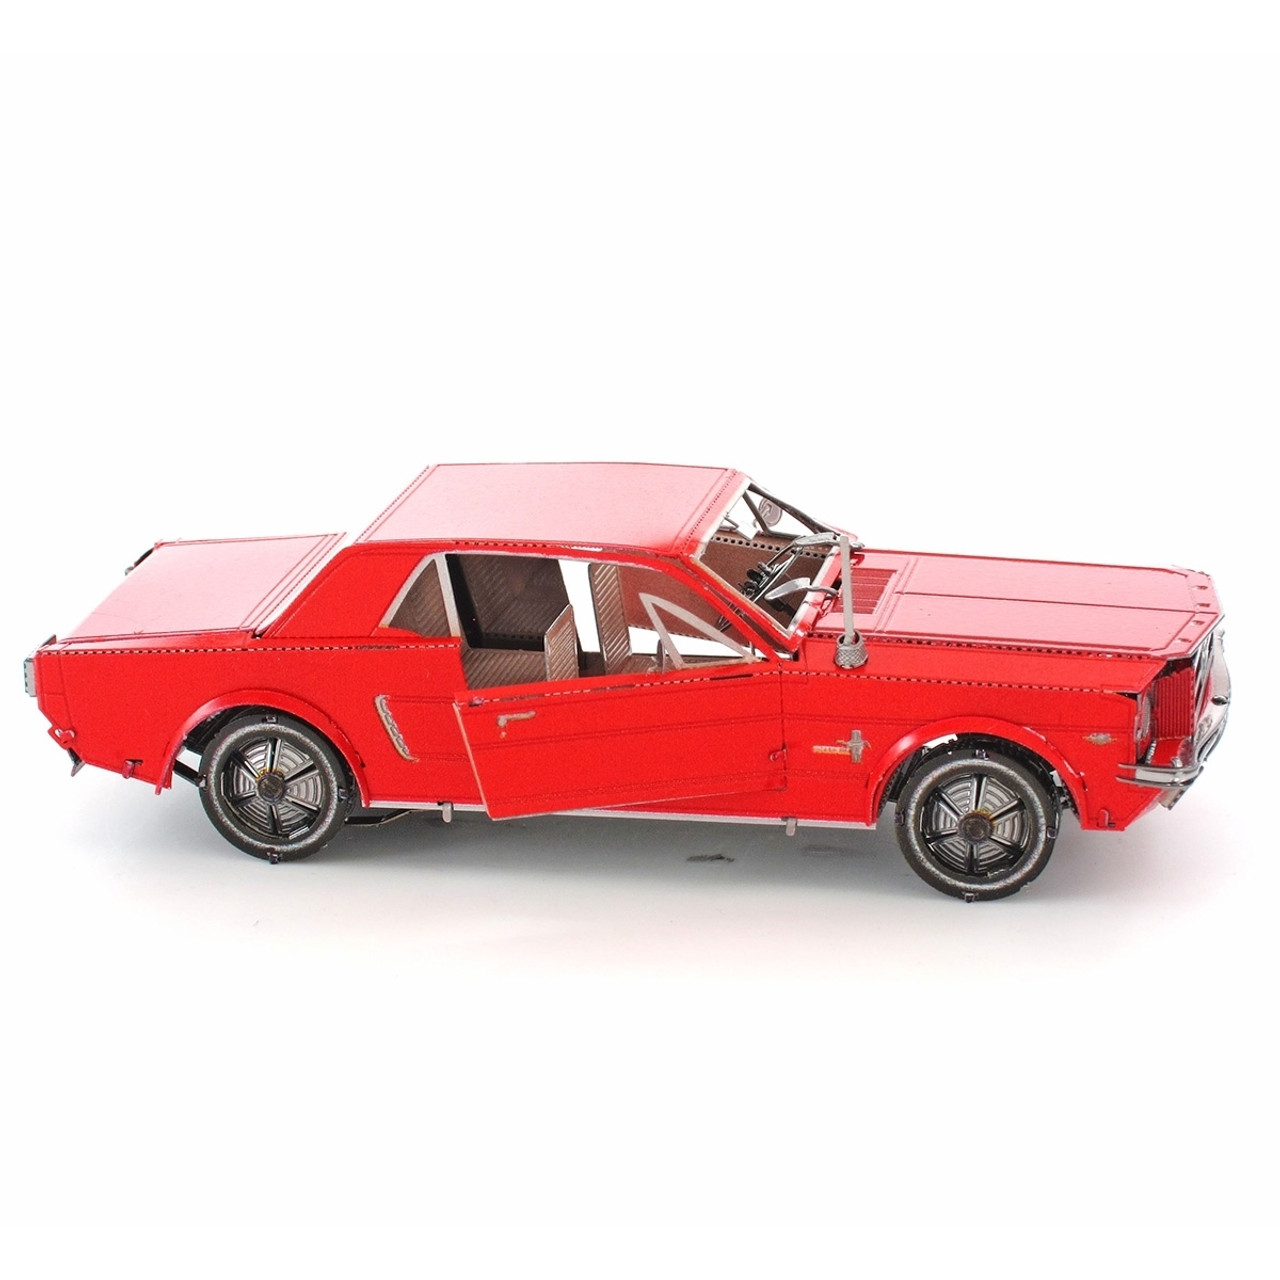 Metal Earth 1965 Ford Mustang Coupe, Red Version